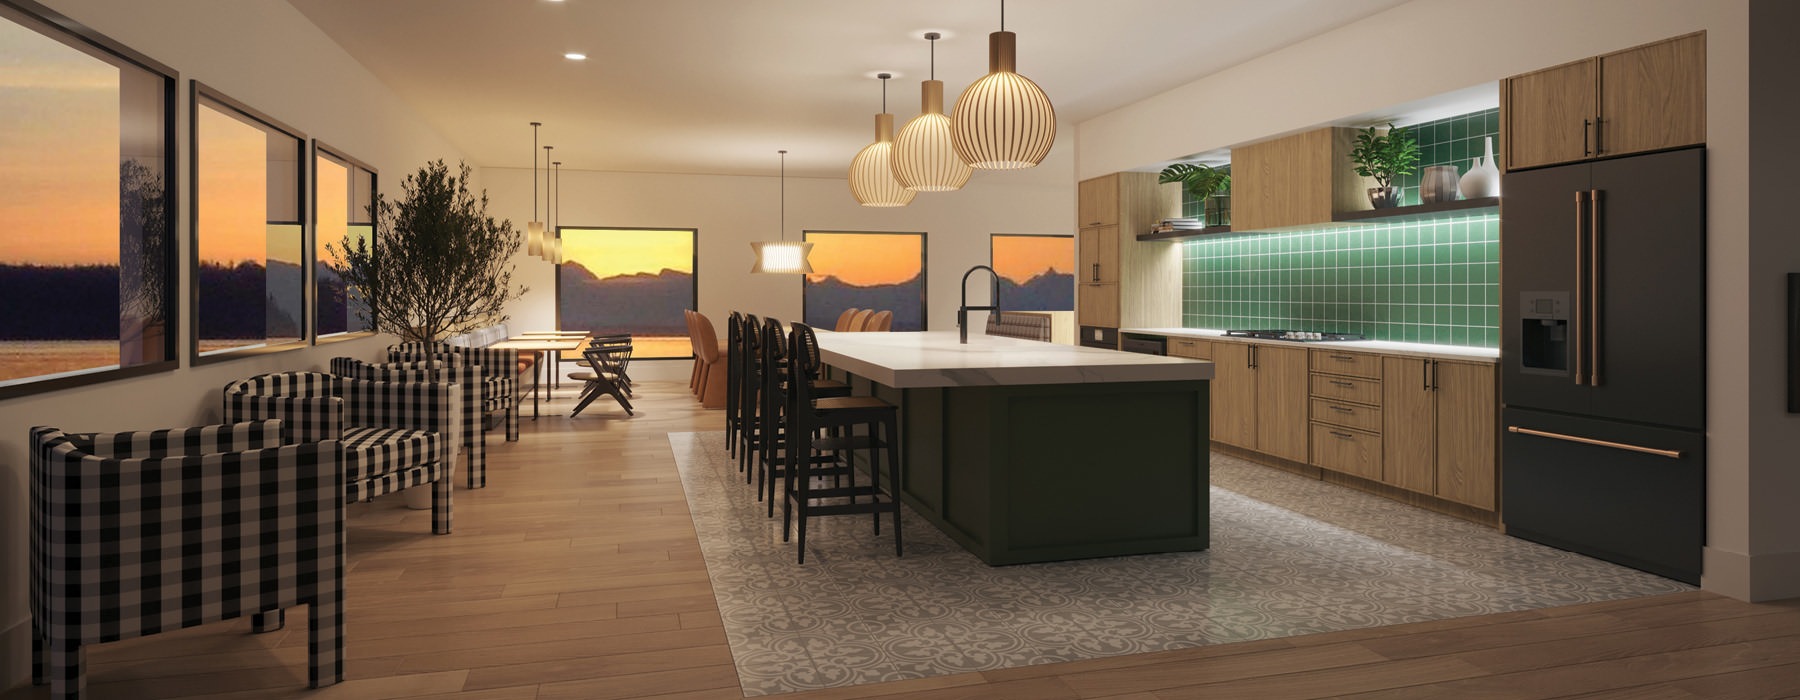 clubhouse kitchen rendering with large island